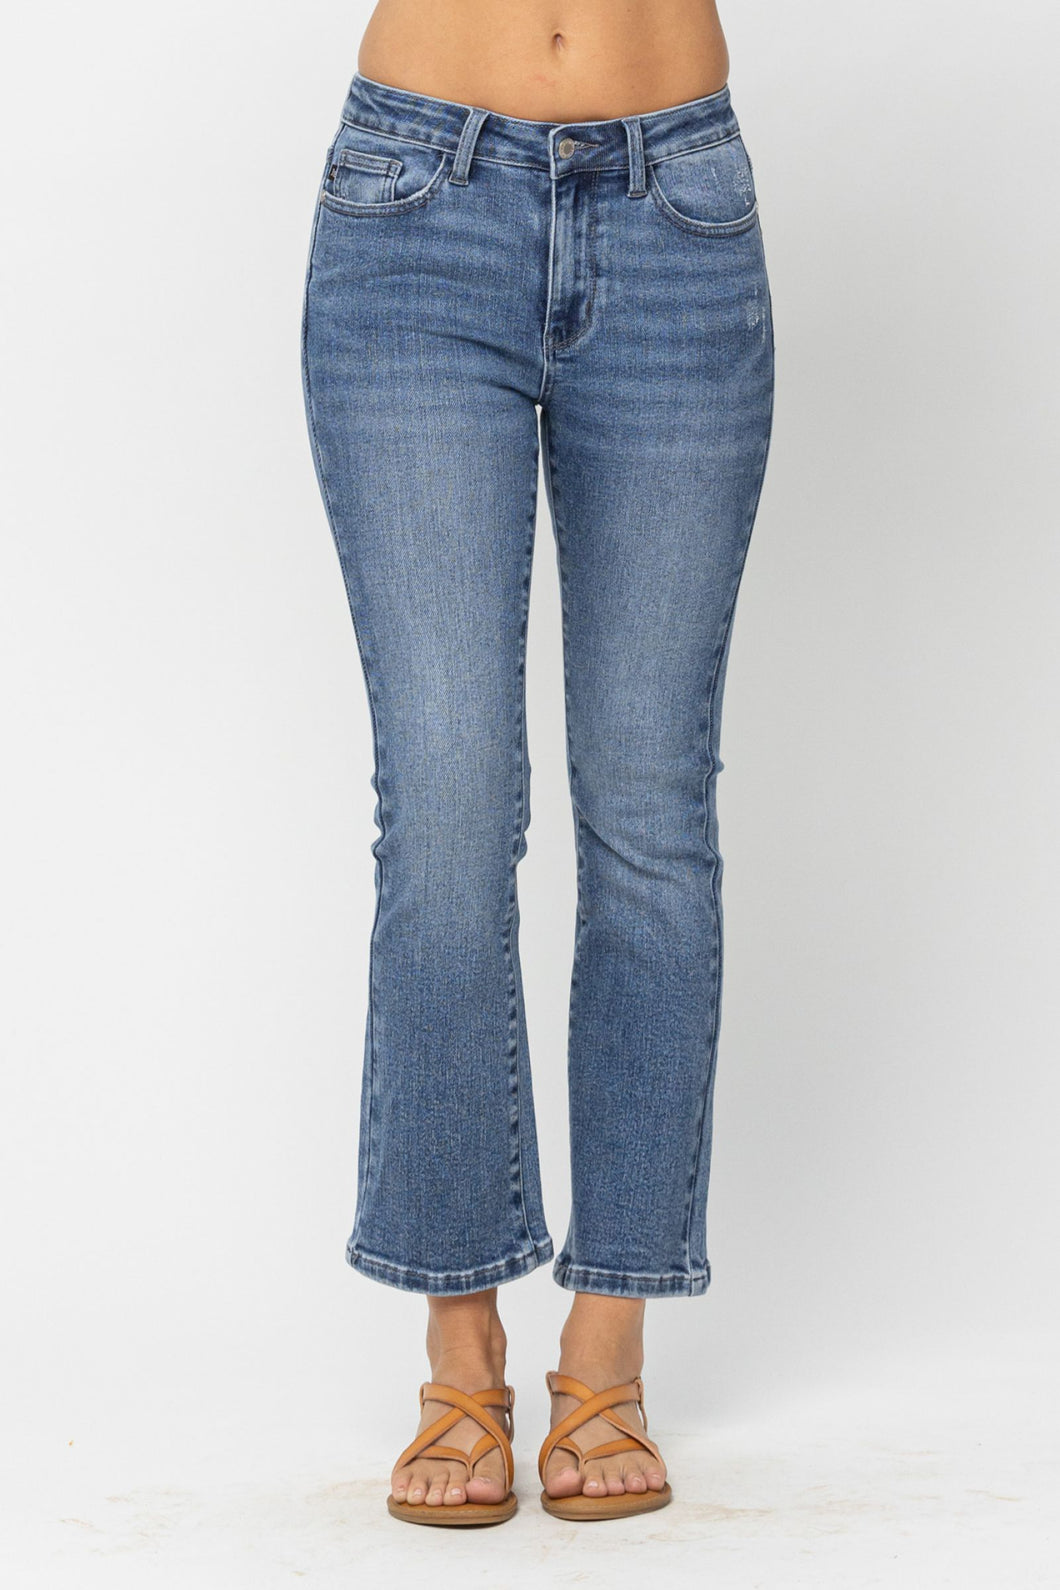 Jess Mid-Rise Cropped Boot Cut